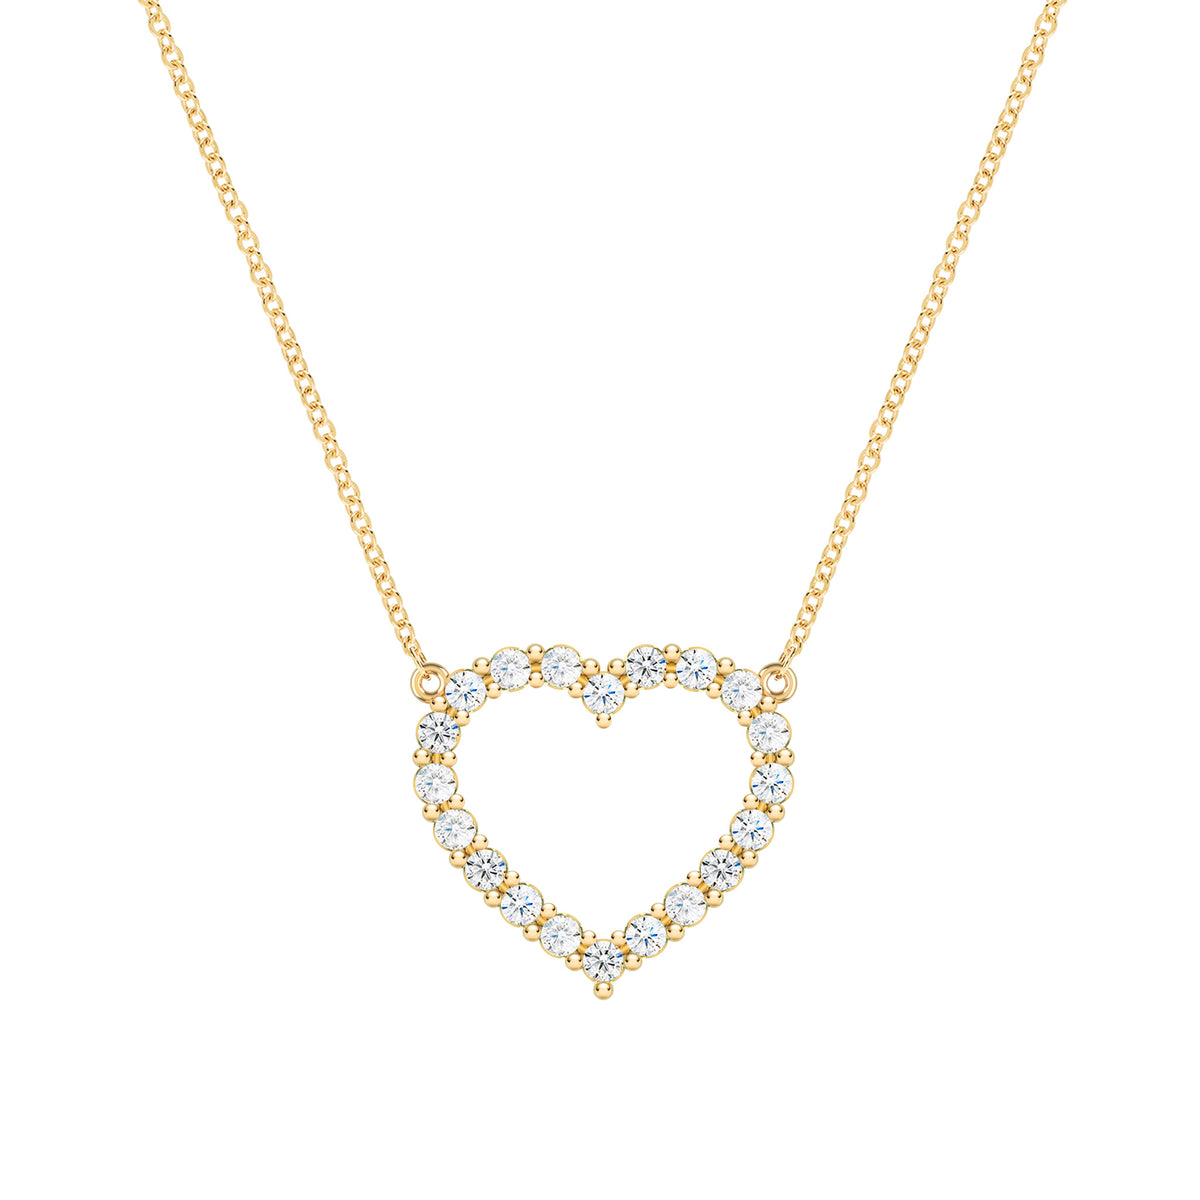 Emerald Cut Diamond Necklace in Yellow Gold | KLENOTA